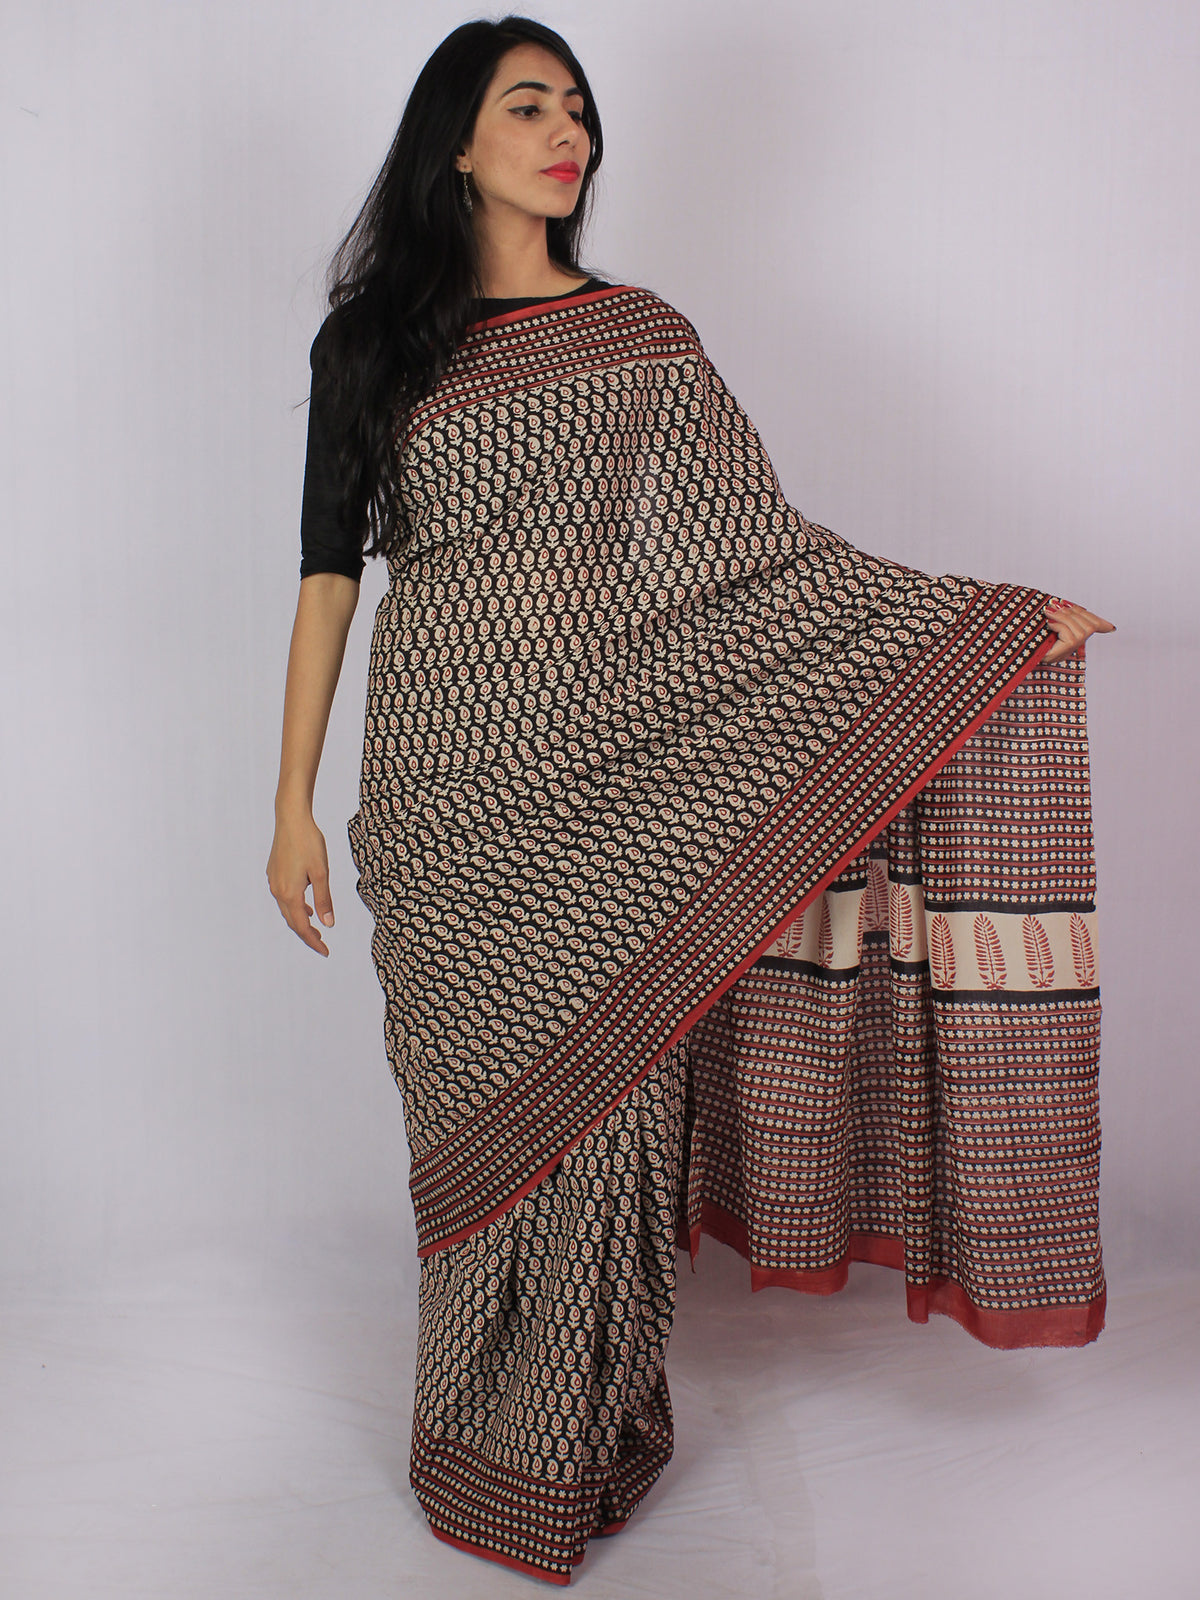 Black Maroon Beige Cotton Hand Block Printed Saree in Natural Colors - S031701175